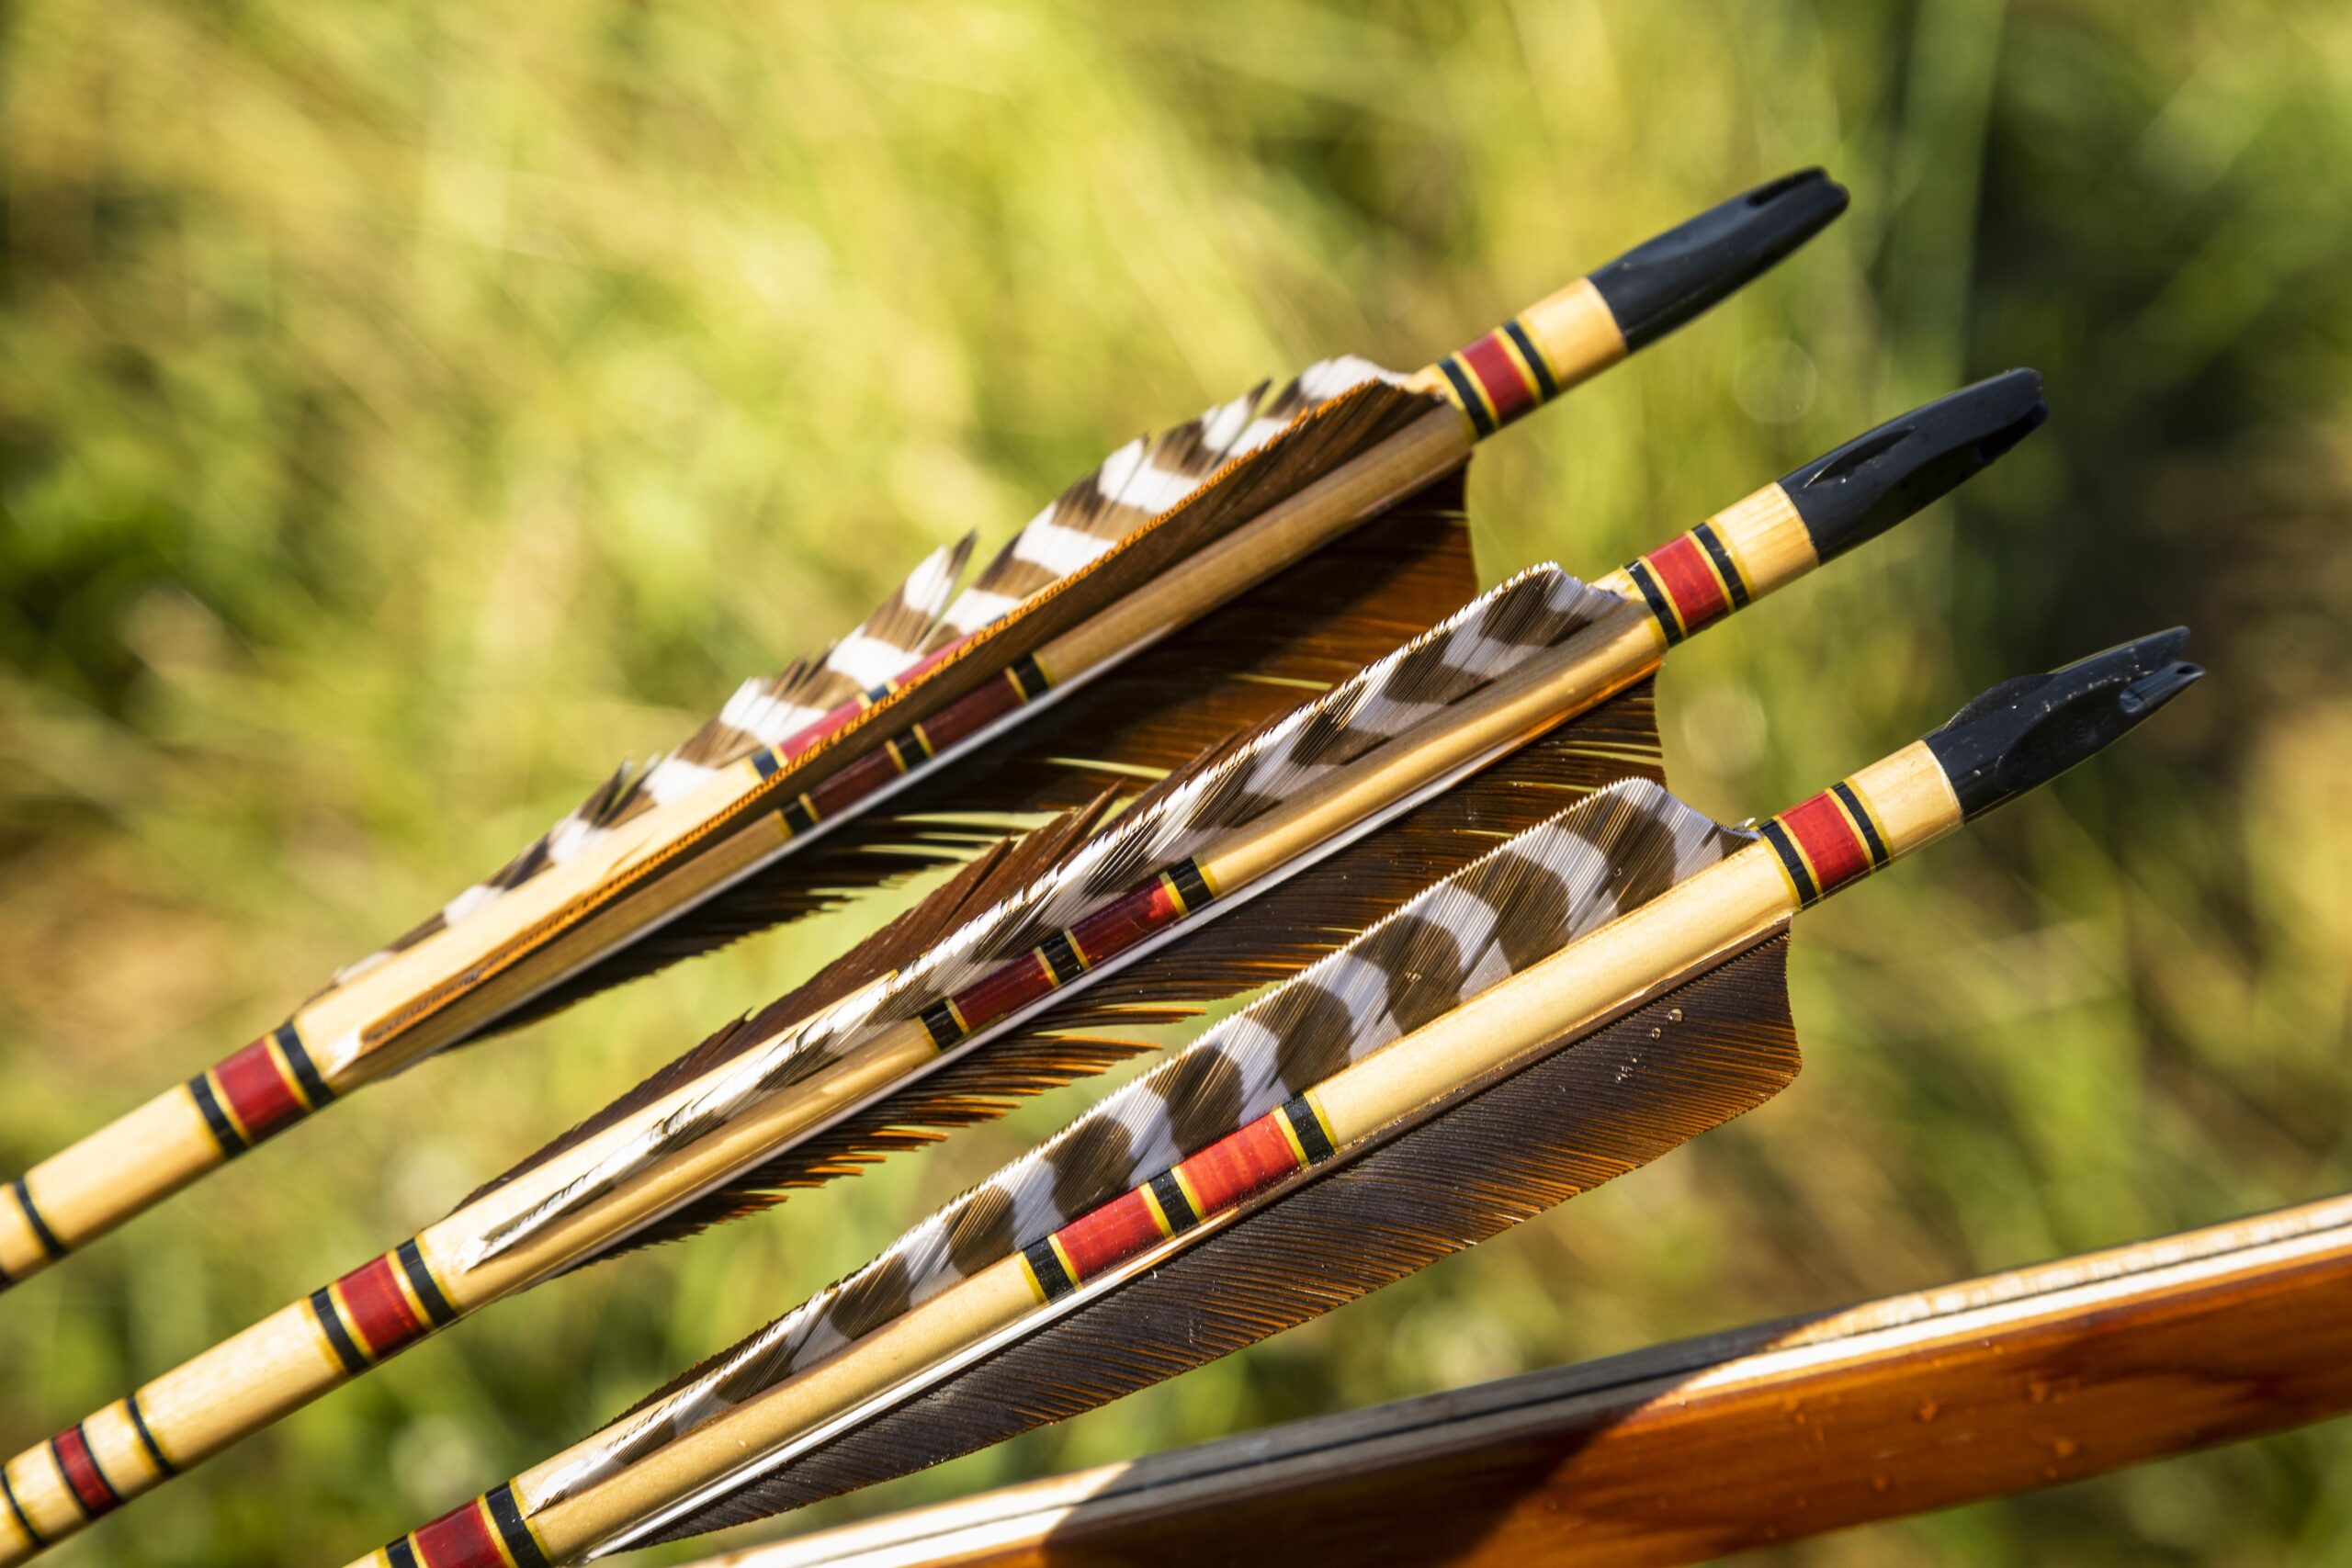 Feather fletchings on traditional wooden arrows.